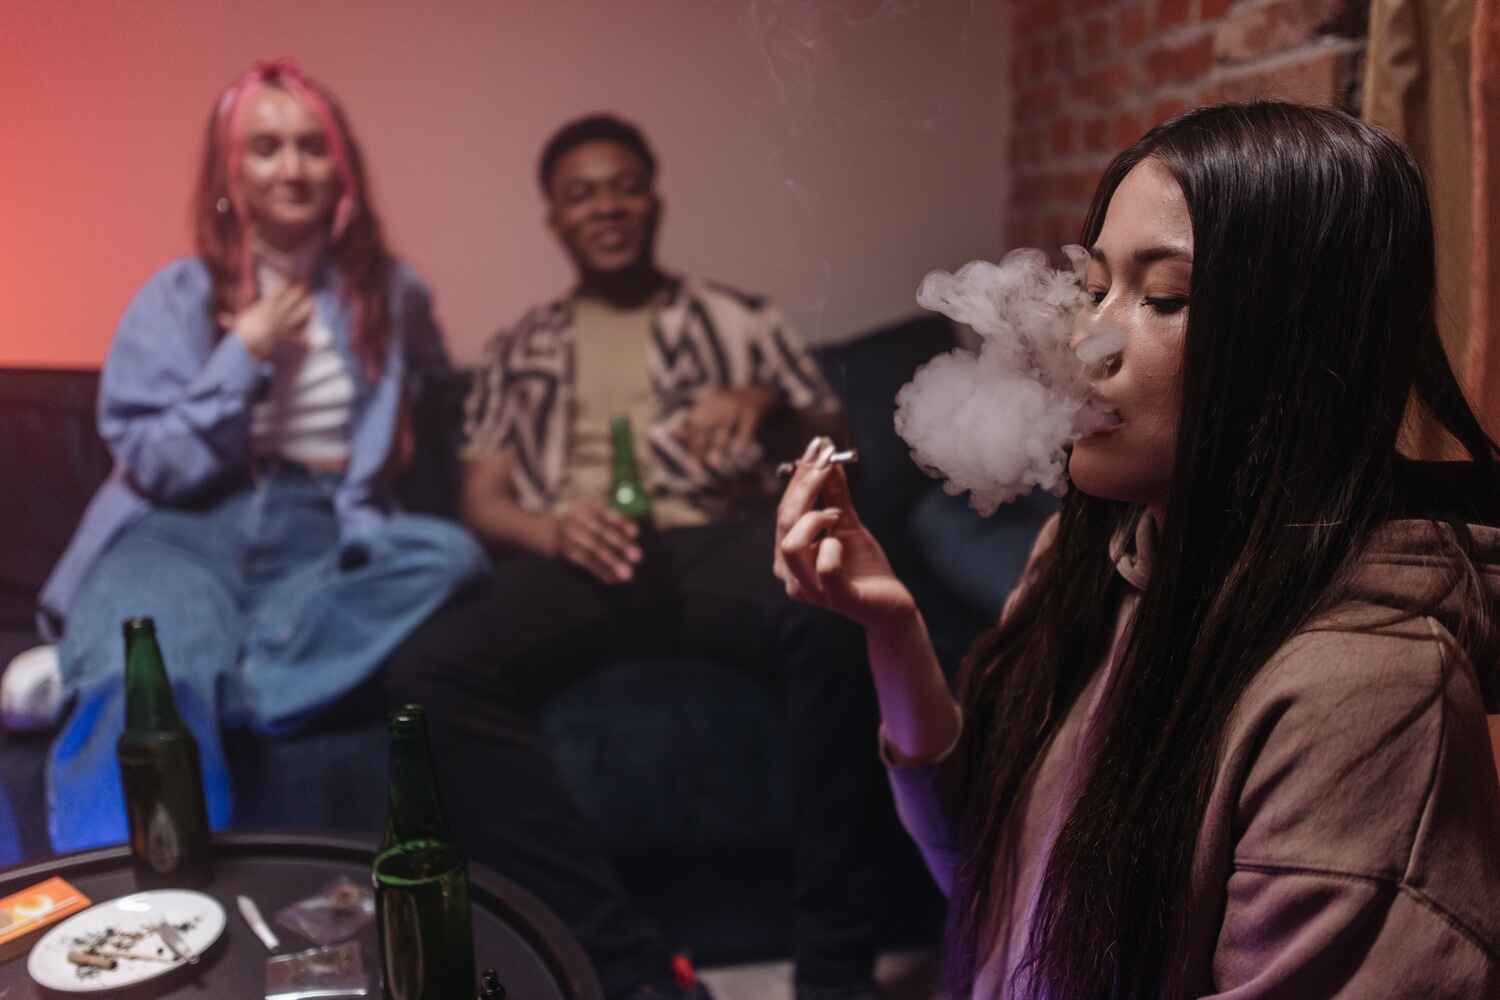 a group of young people smoking weed